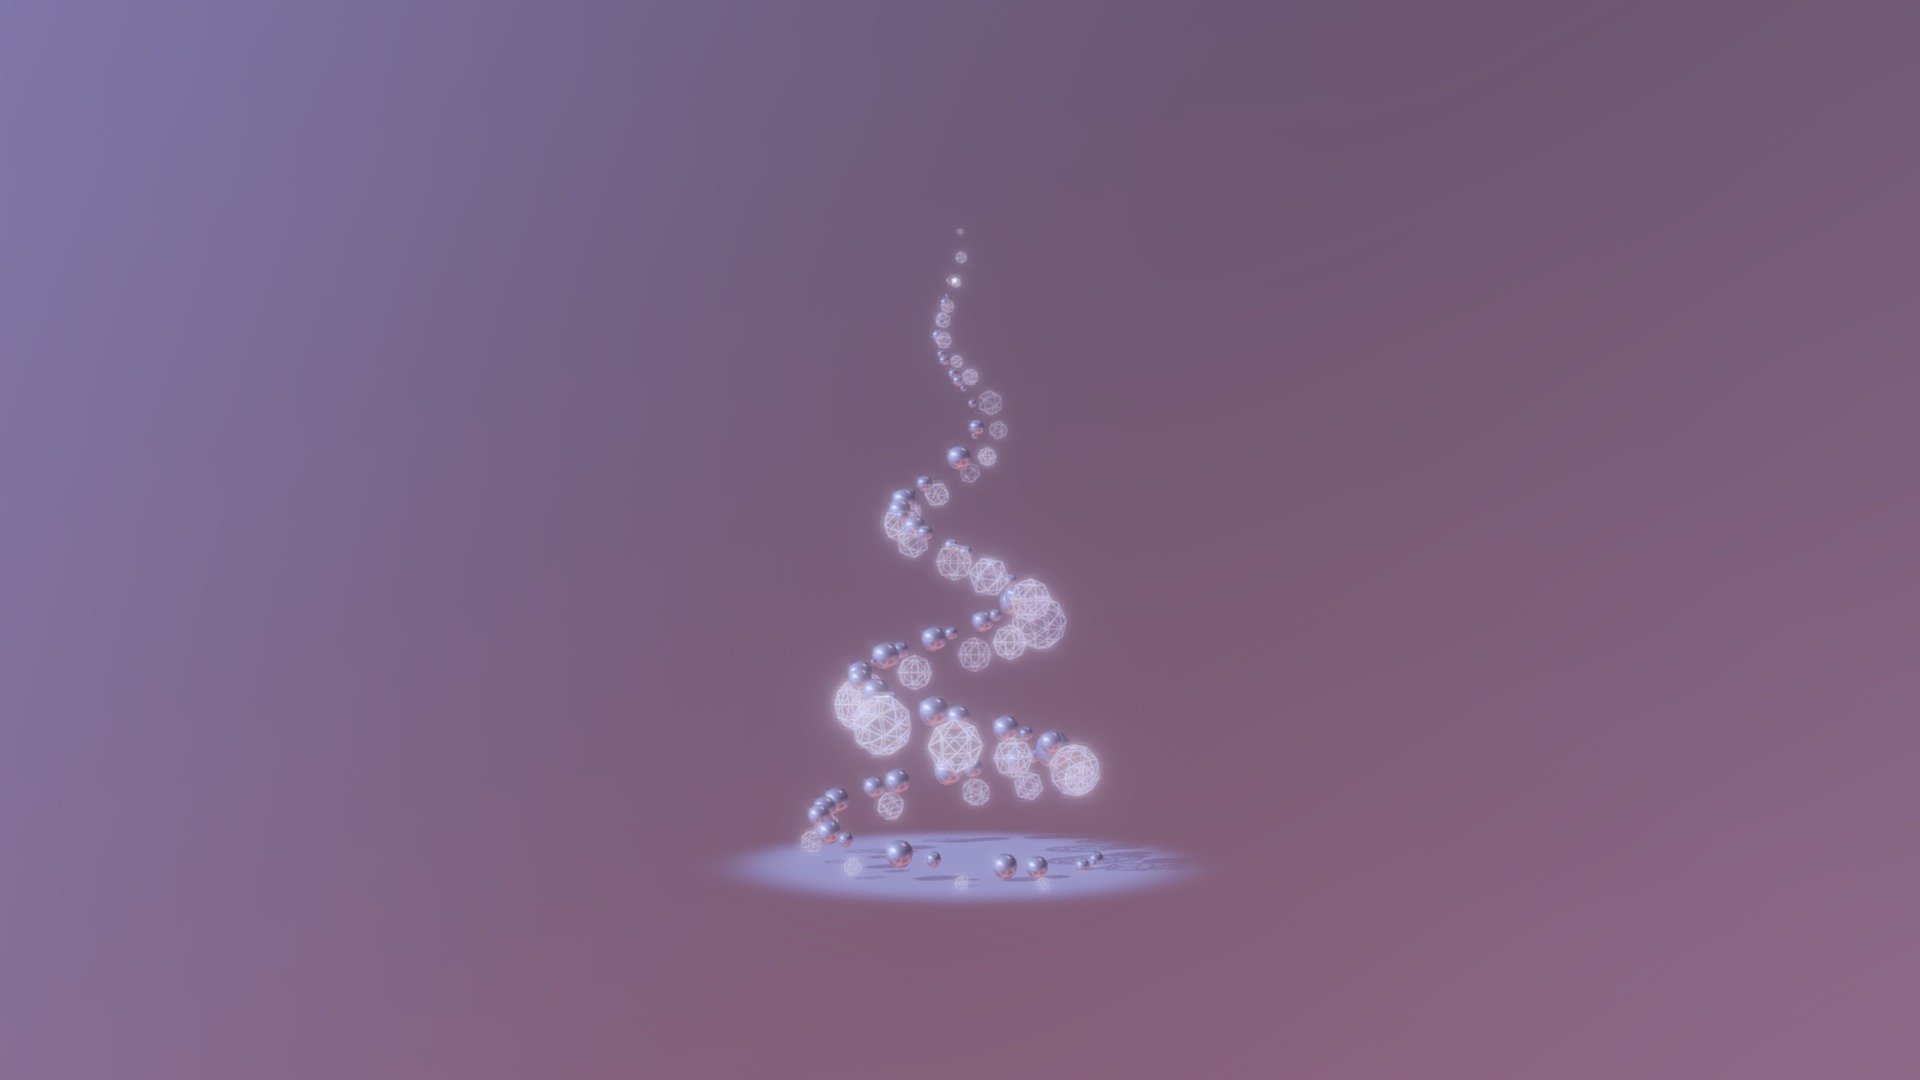 MODERN SPIRAL CHRISTMAS TREE

This is a smaller version of an artificial Christmas tree made from a variety of balls.  On the structure there are light bulbs arranged in a spiral, through which dynamic light flows from bottom to top.  Full version more complex HERE - MODERN SPIRAL CHRISTMAS TREE LIGHTING ANIMATED - Buy Royalty Free 3D model by DANILADESIGN.RU (@vychurov) 3d model